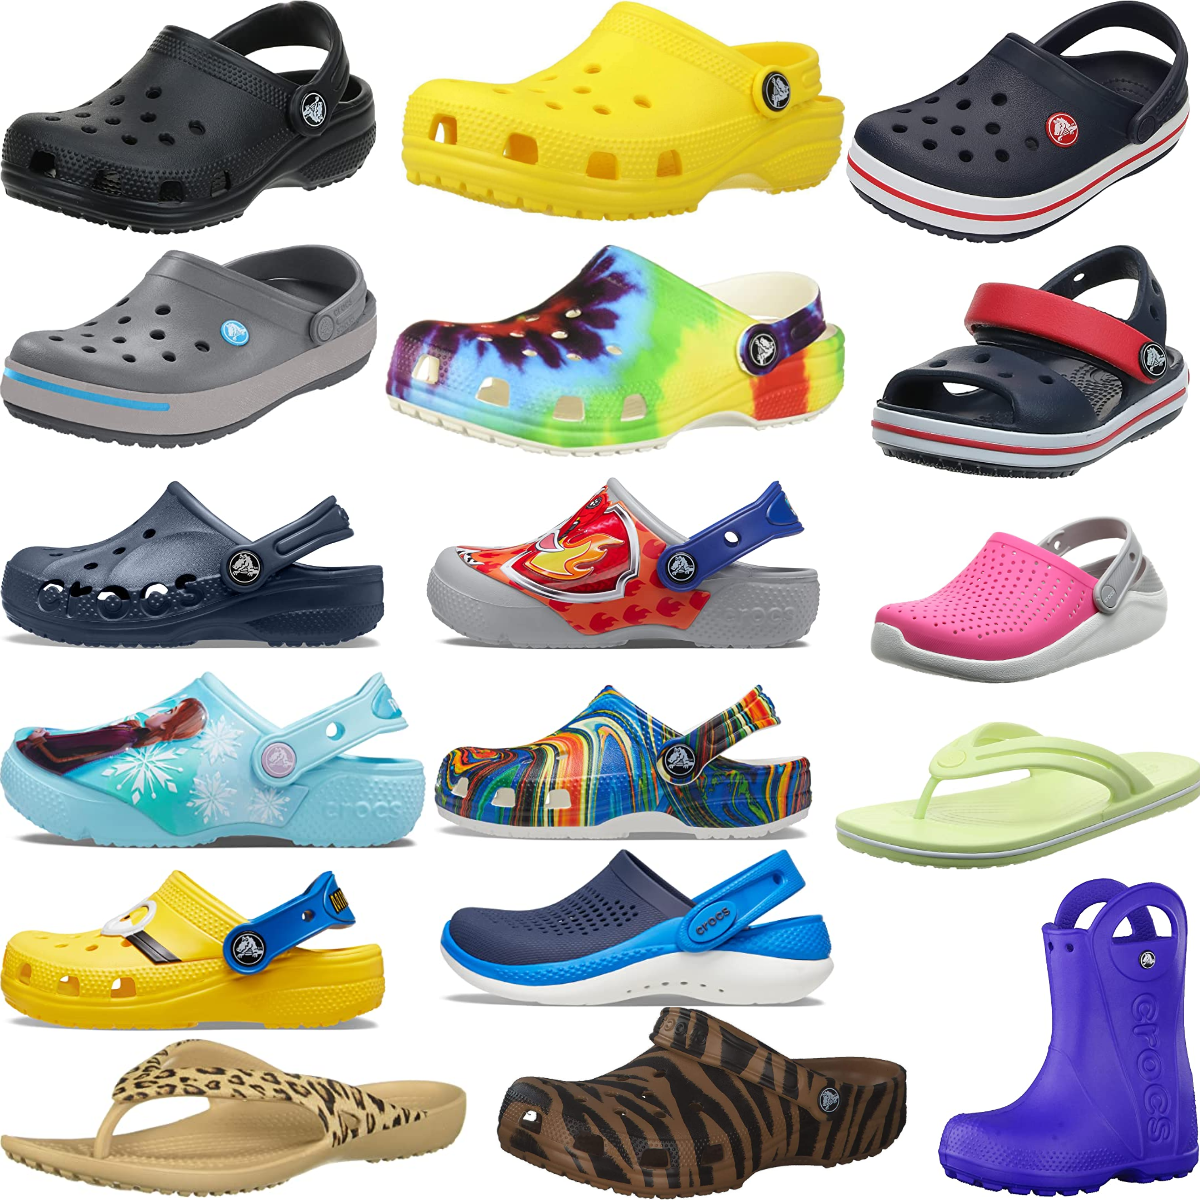 Huge Markdowns on Crocs for the Family at Amazon - Under $20 | Smart Savers